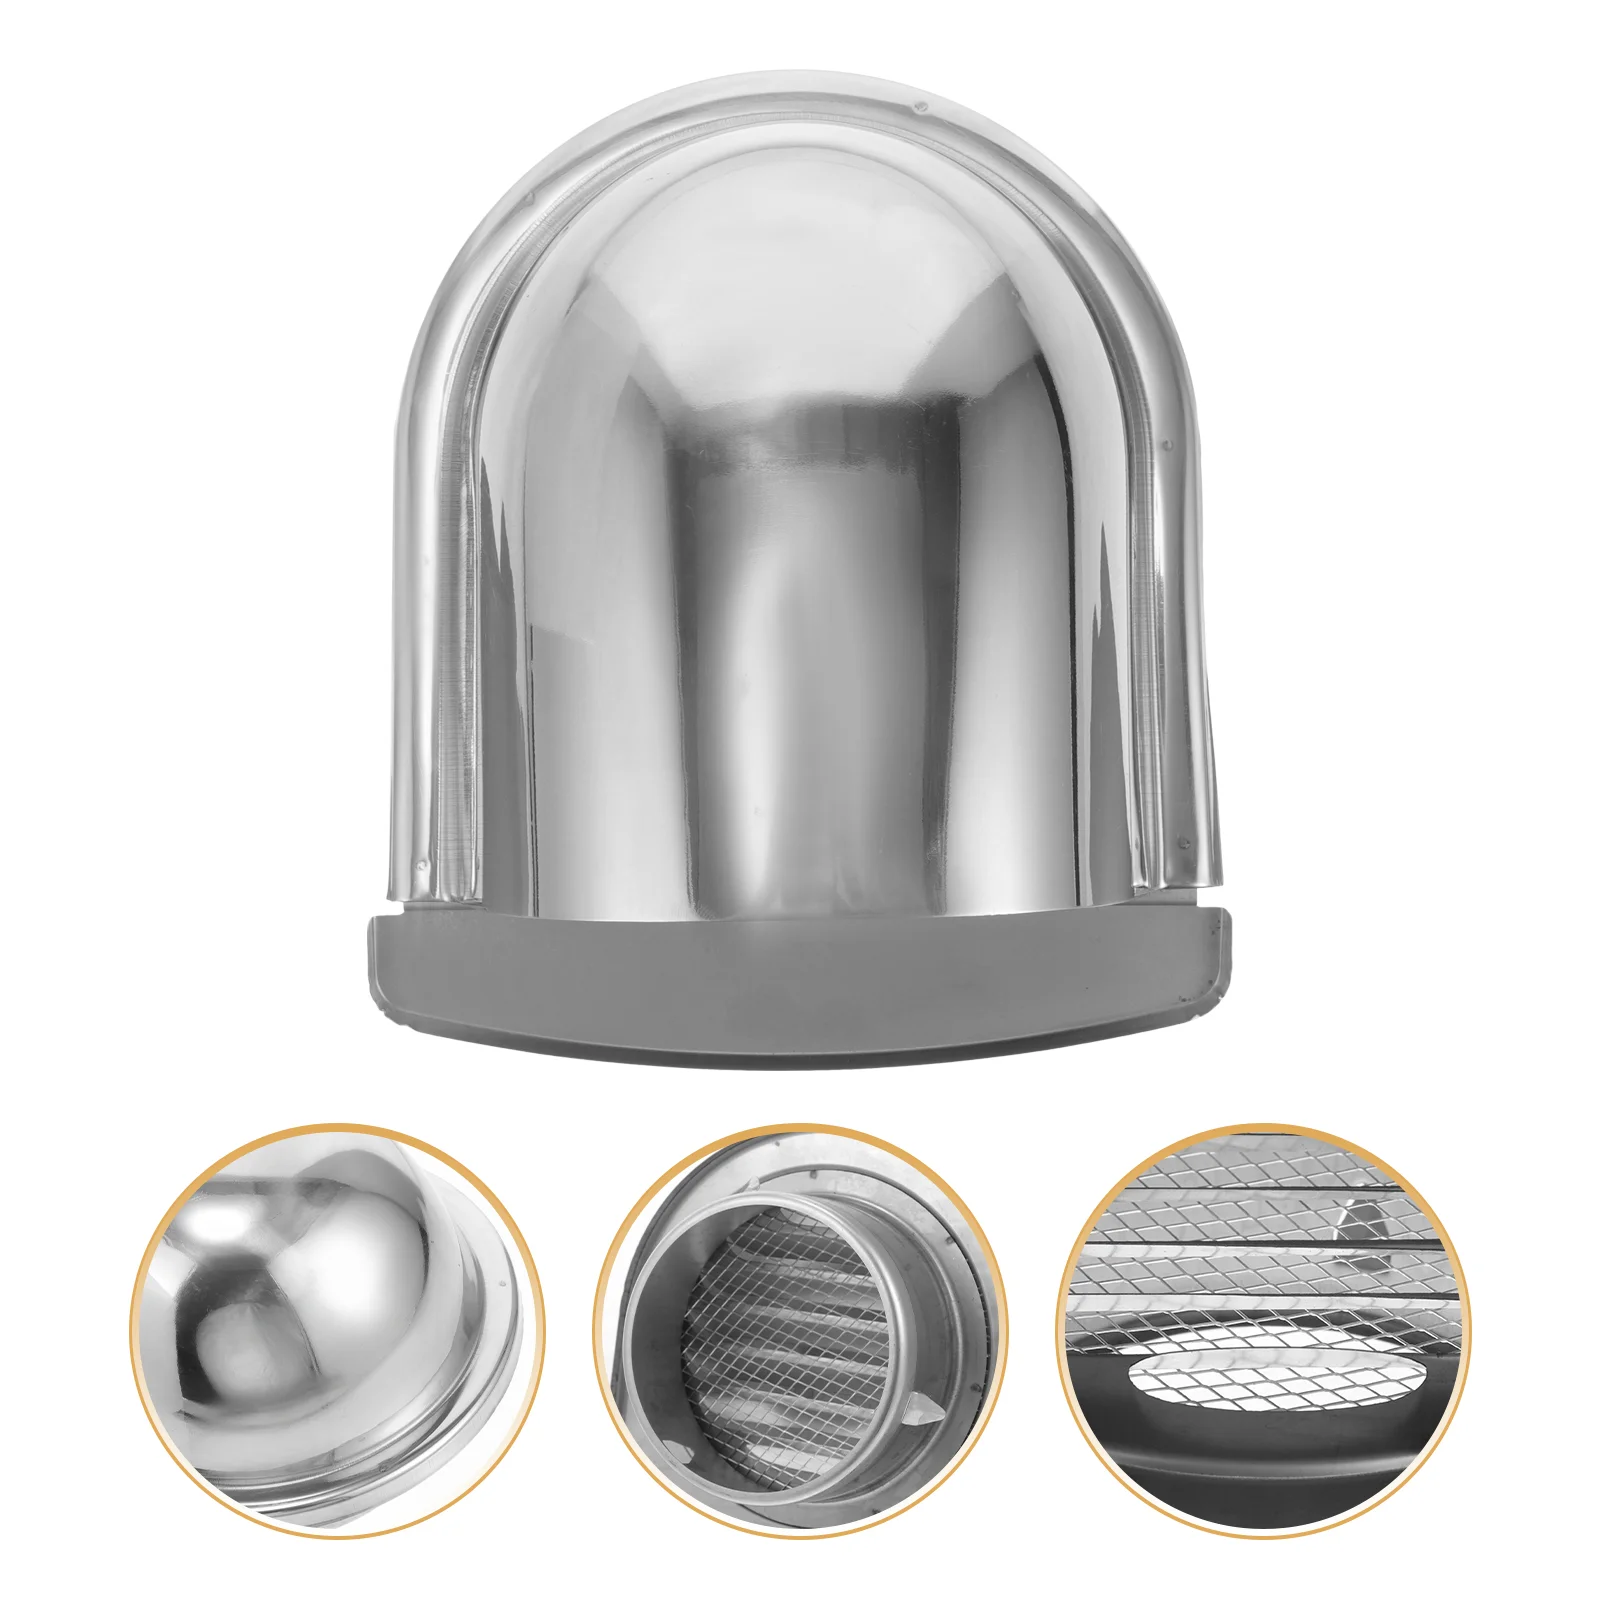 

Round Exhaust Cap Pipeline Chimney Accessories Vent Caps Smoke Funnel Cover Roof Rain Covers Insulation Rainproof